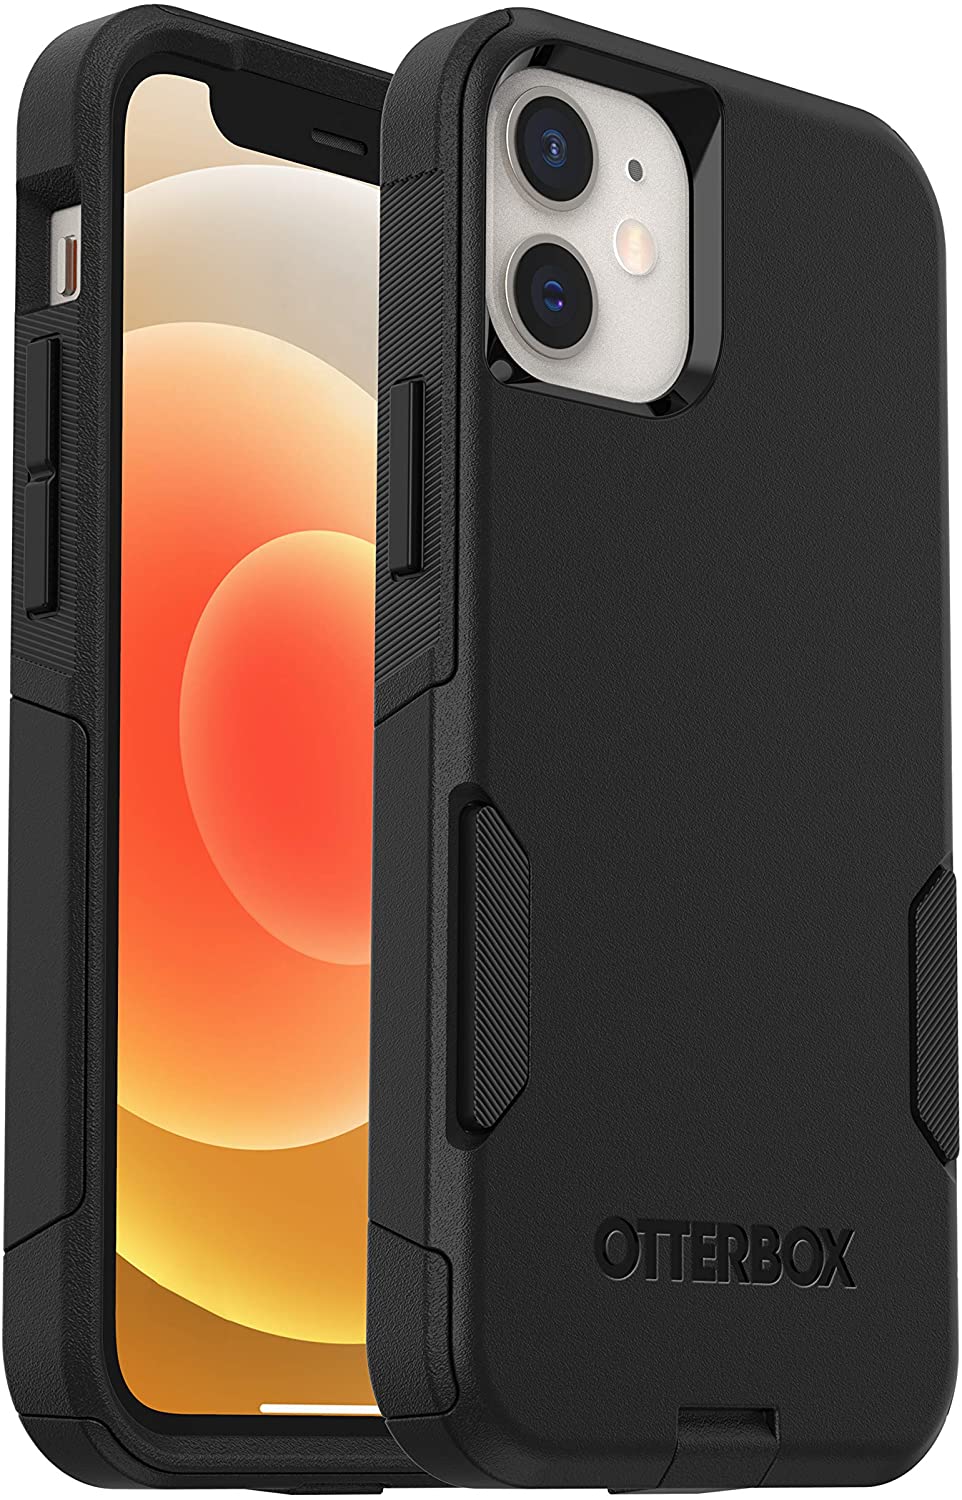 OtterBox COMMUTER SERIES Case for Apple iPhone 12 Mini - Black (Certified Refurbished)